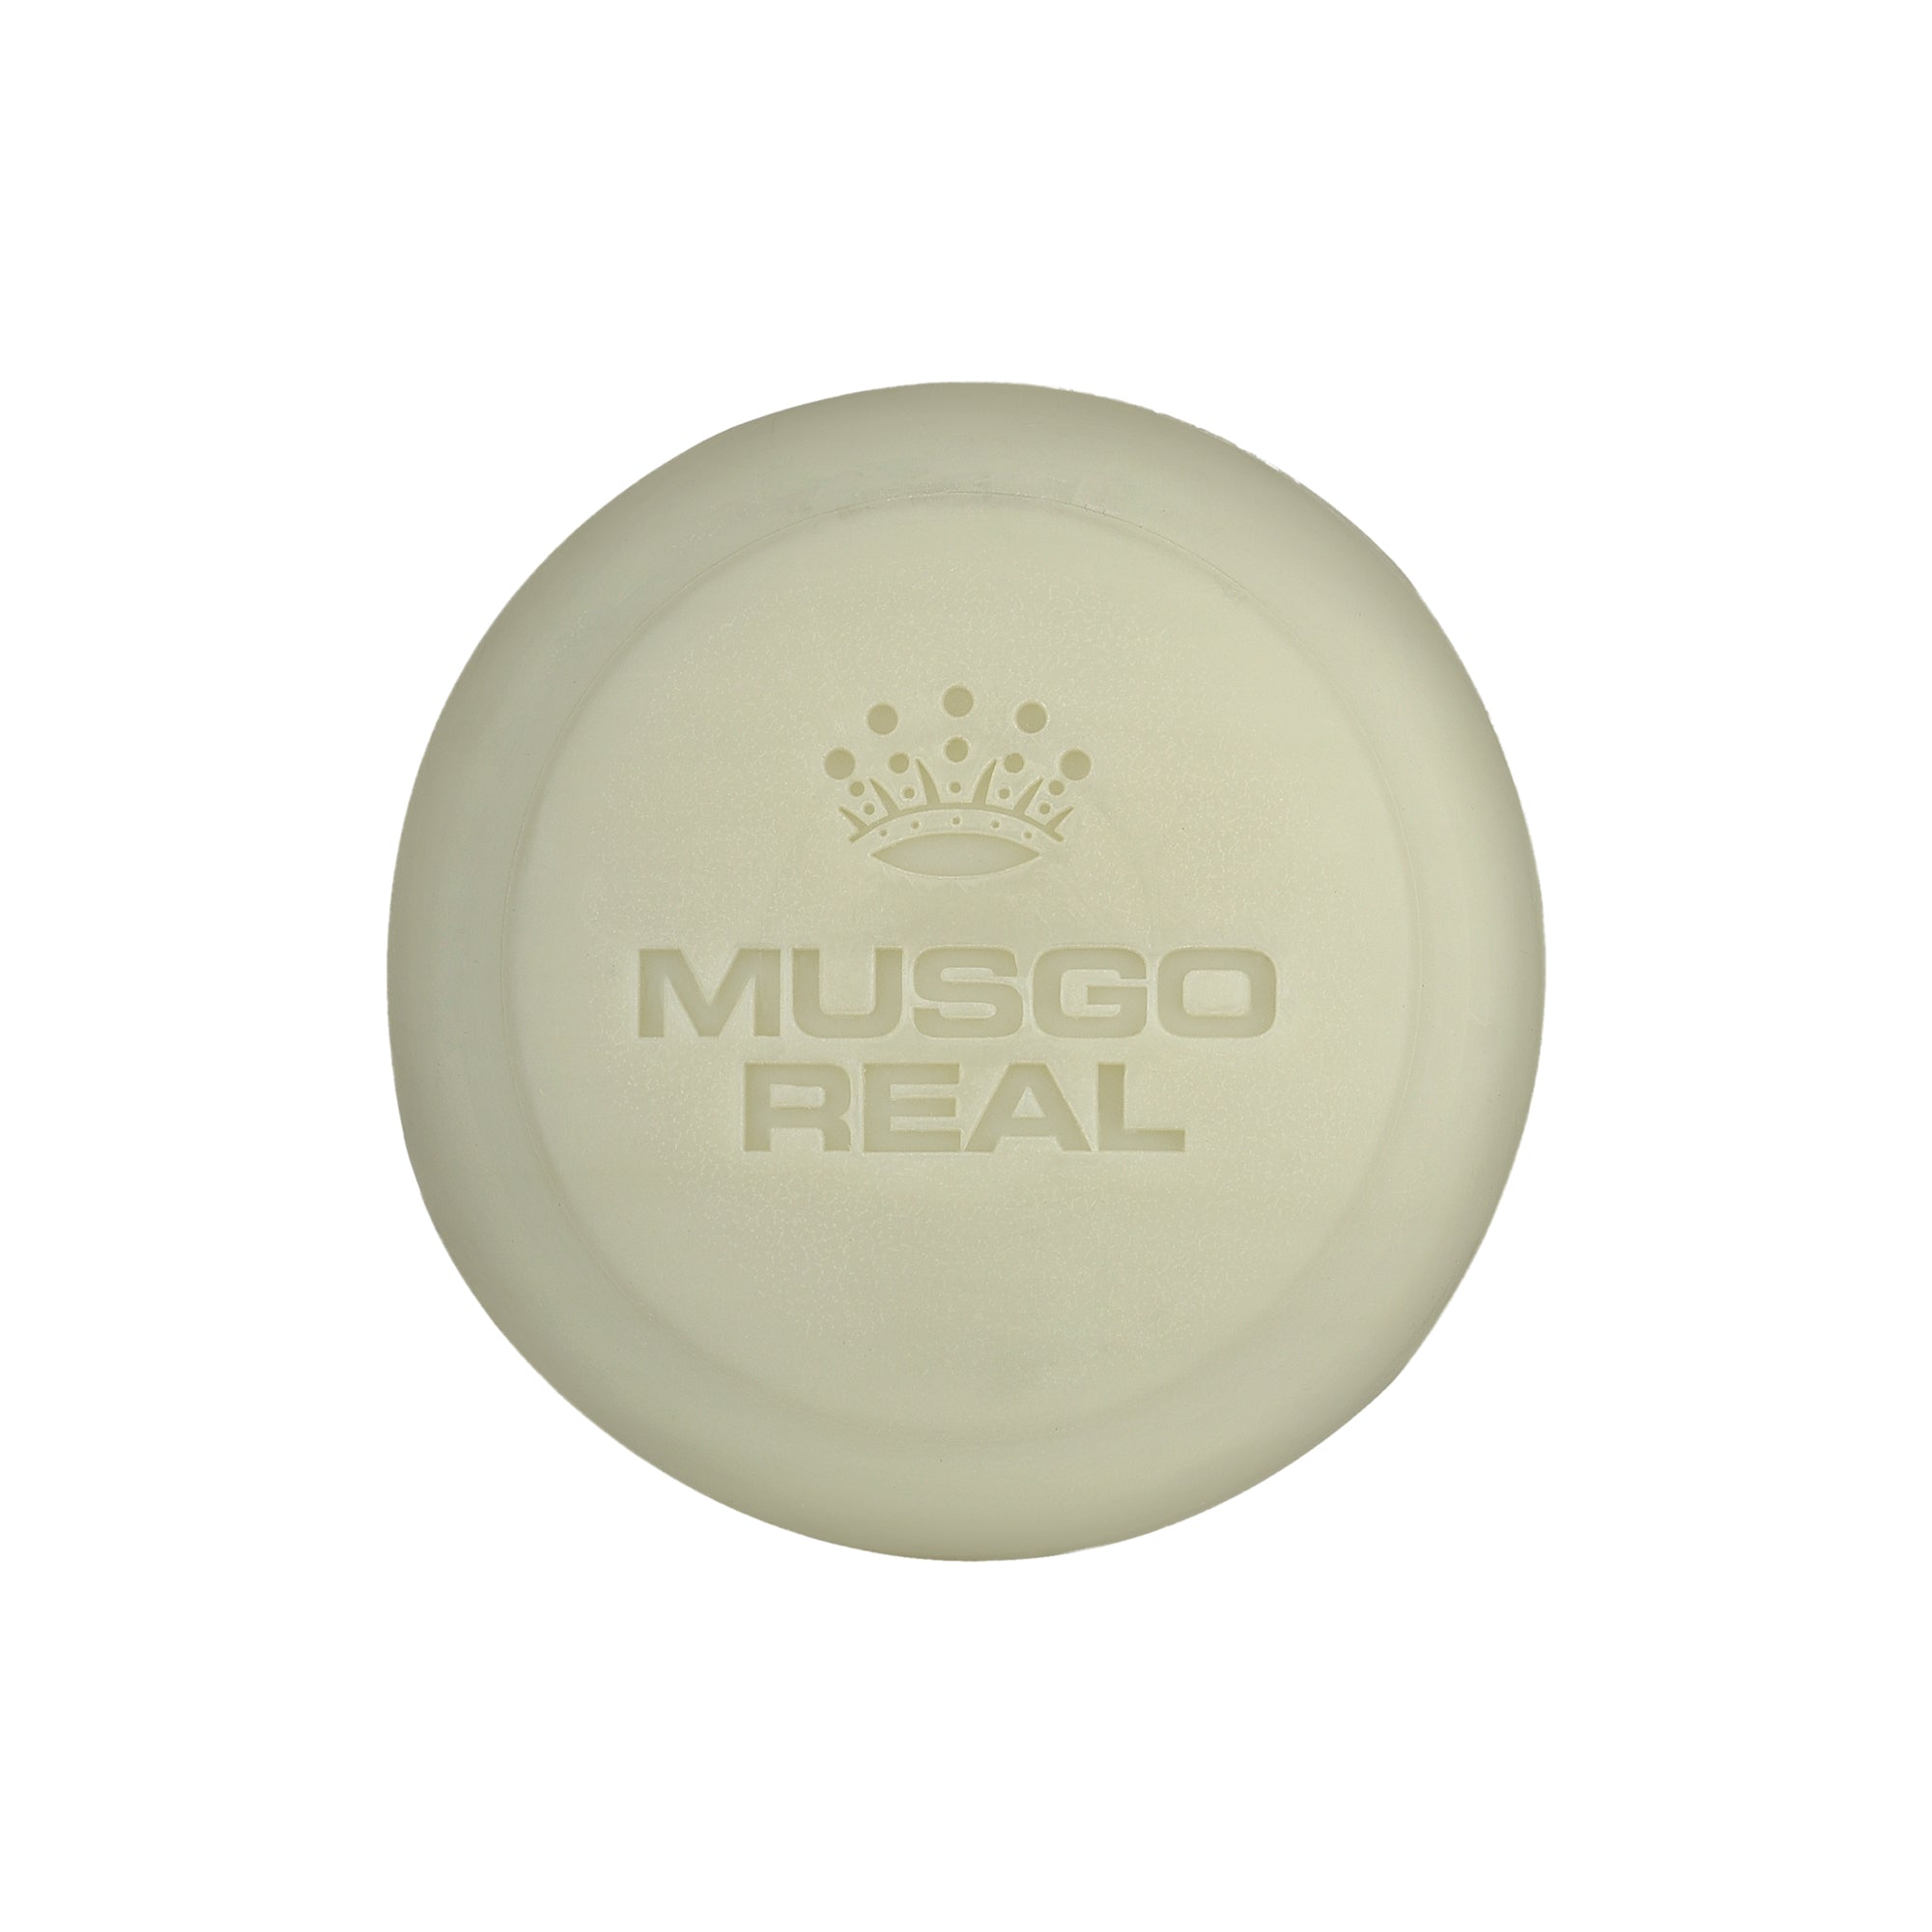 Musgo Real Classic Scent Shaving Soap